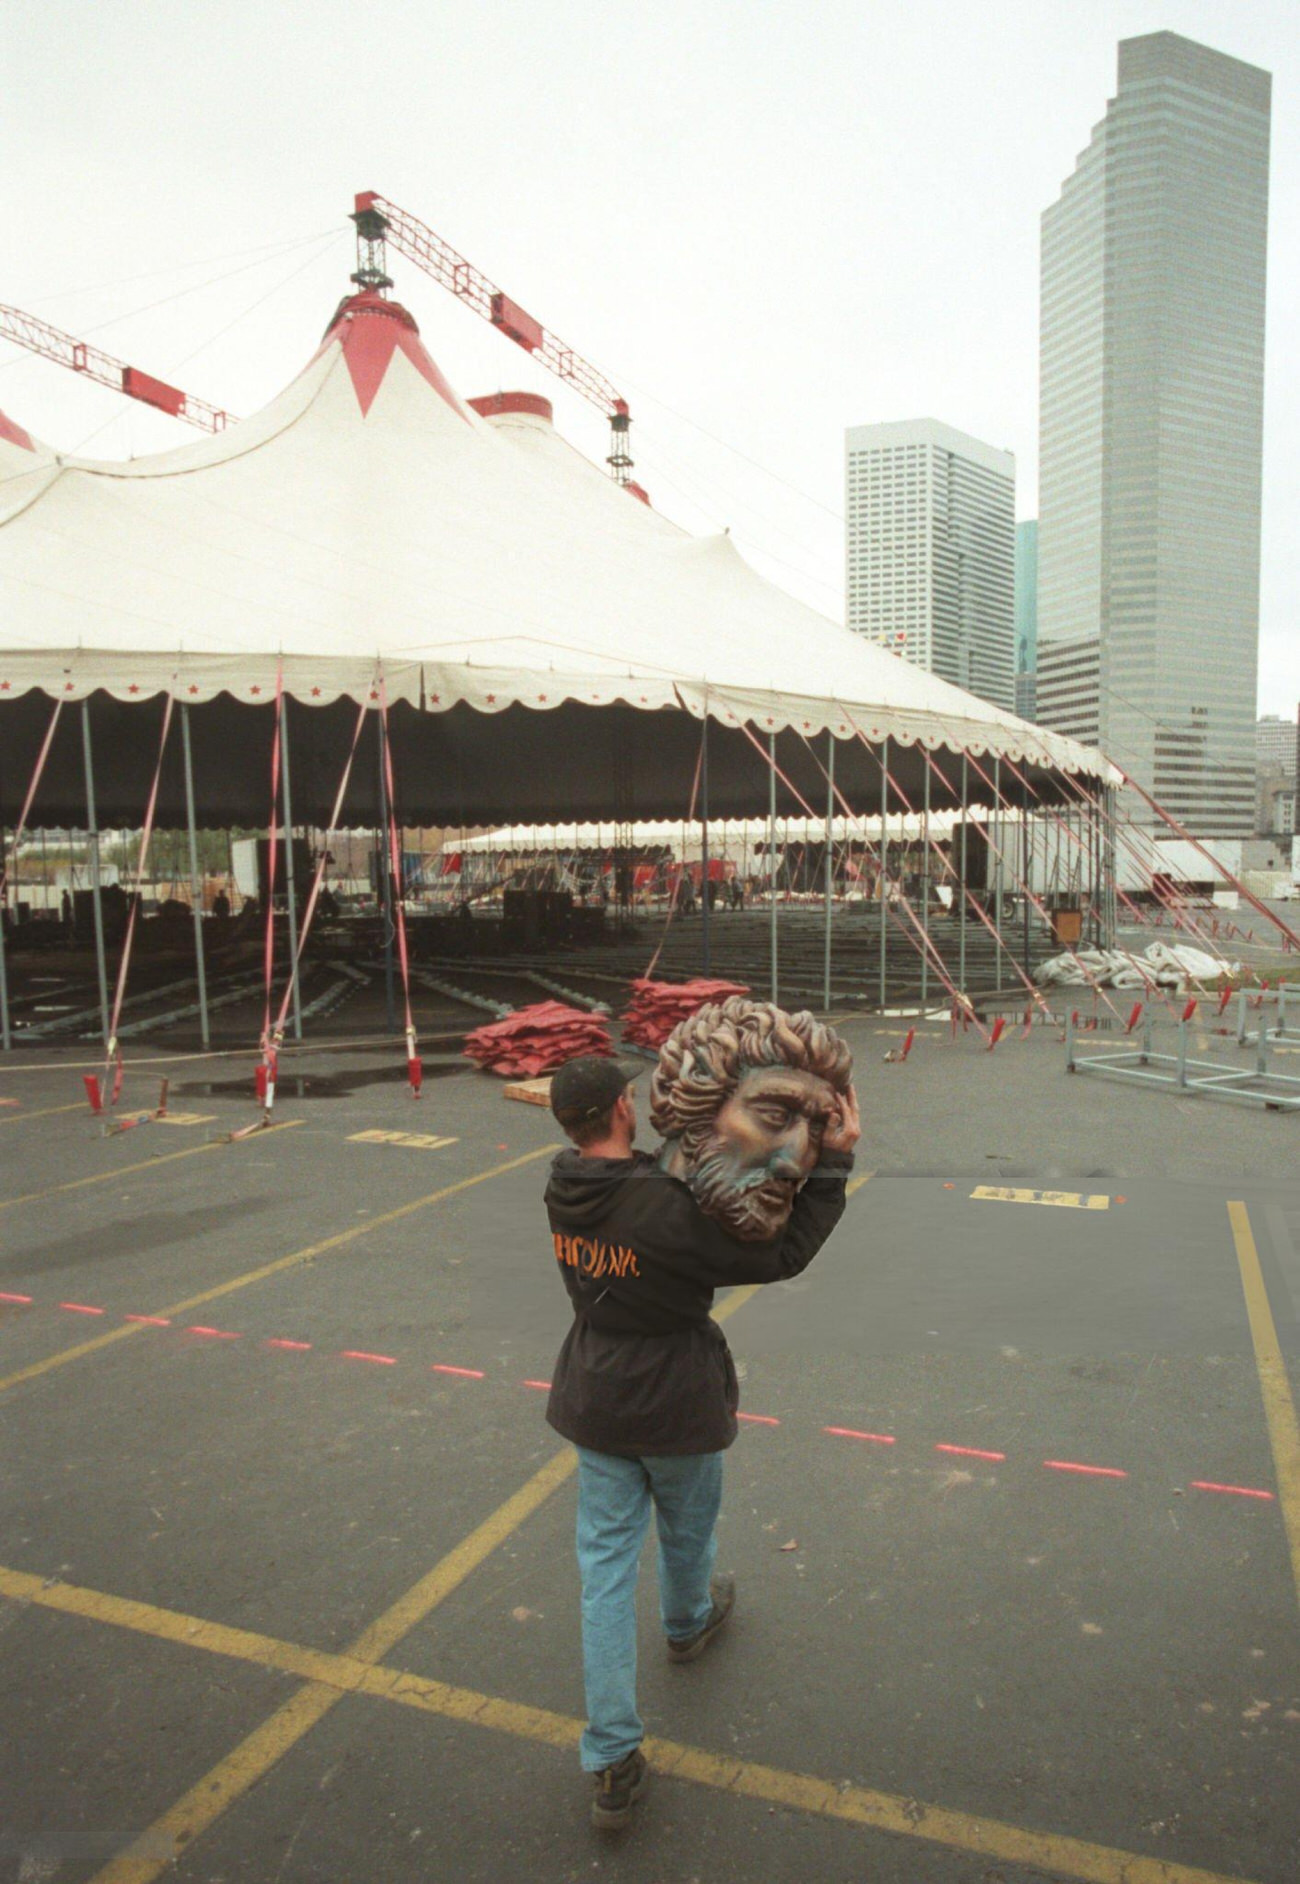 Barnum's Kaleidoscape's ring boss prepares for the circus under a tent downtown, Houston, Texas, 1999.